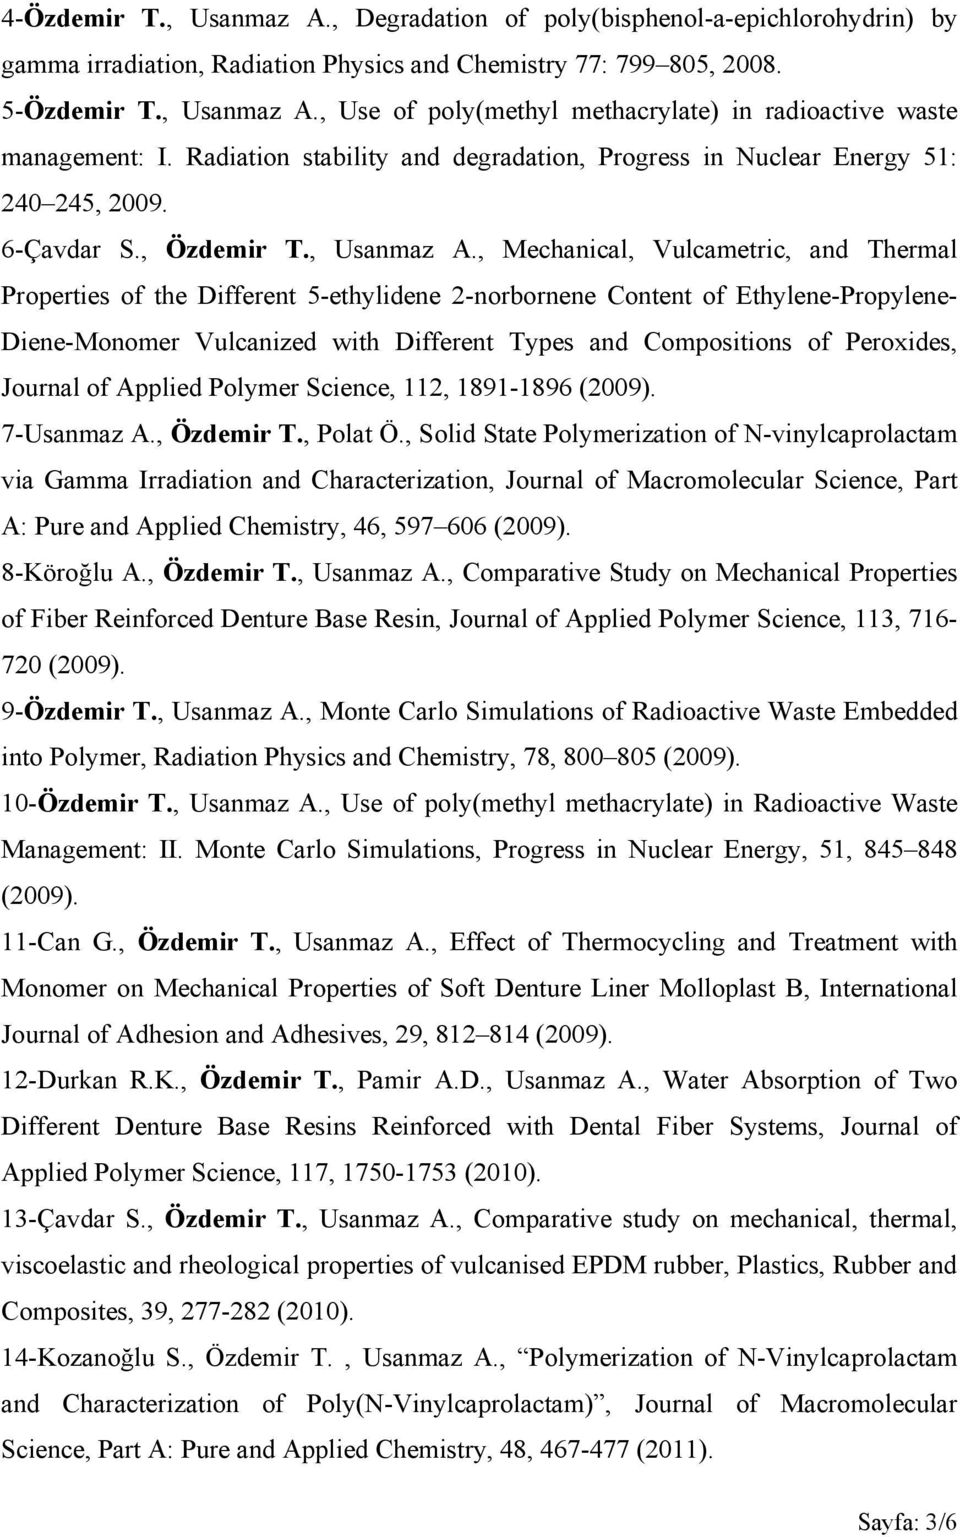 , Mechanical, Vulcametric, and Thermal Properties of the Different 5-ethylidene 2-norbornene Content of Ethylene-Propylene- Diene-Monomer Vulcanized with Different Types and Compositions of